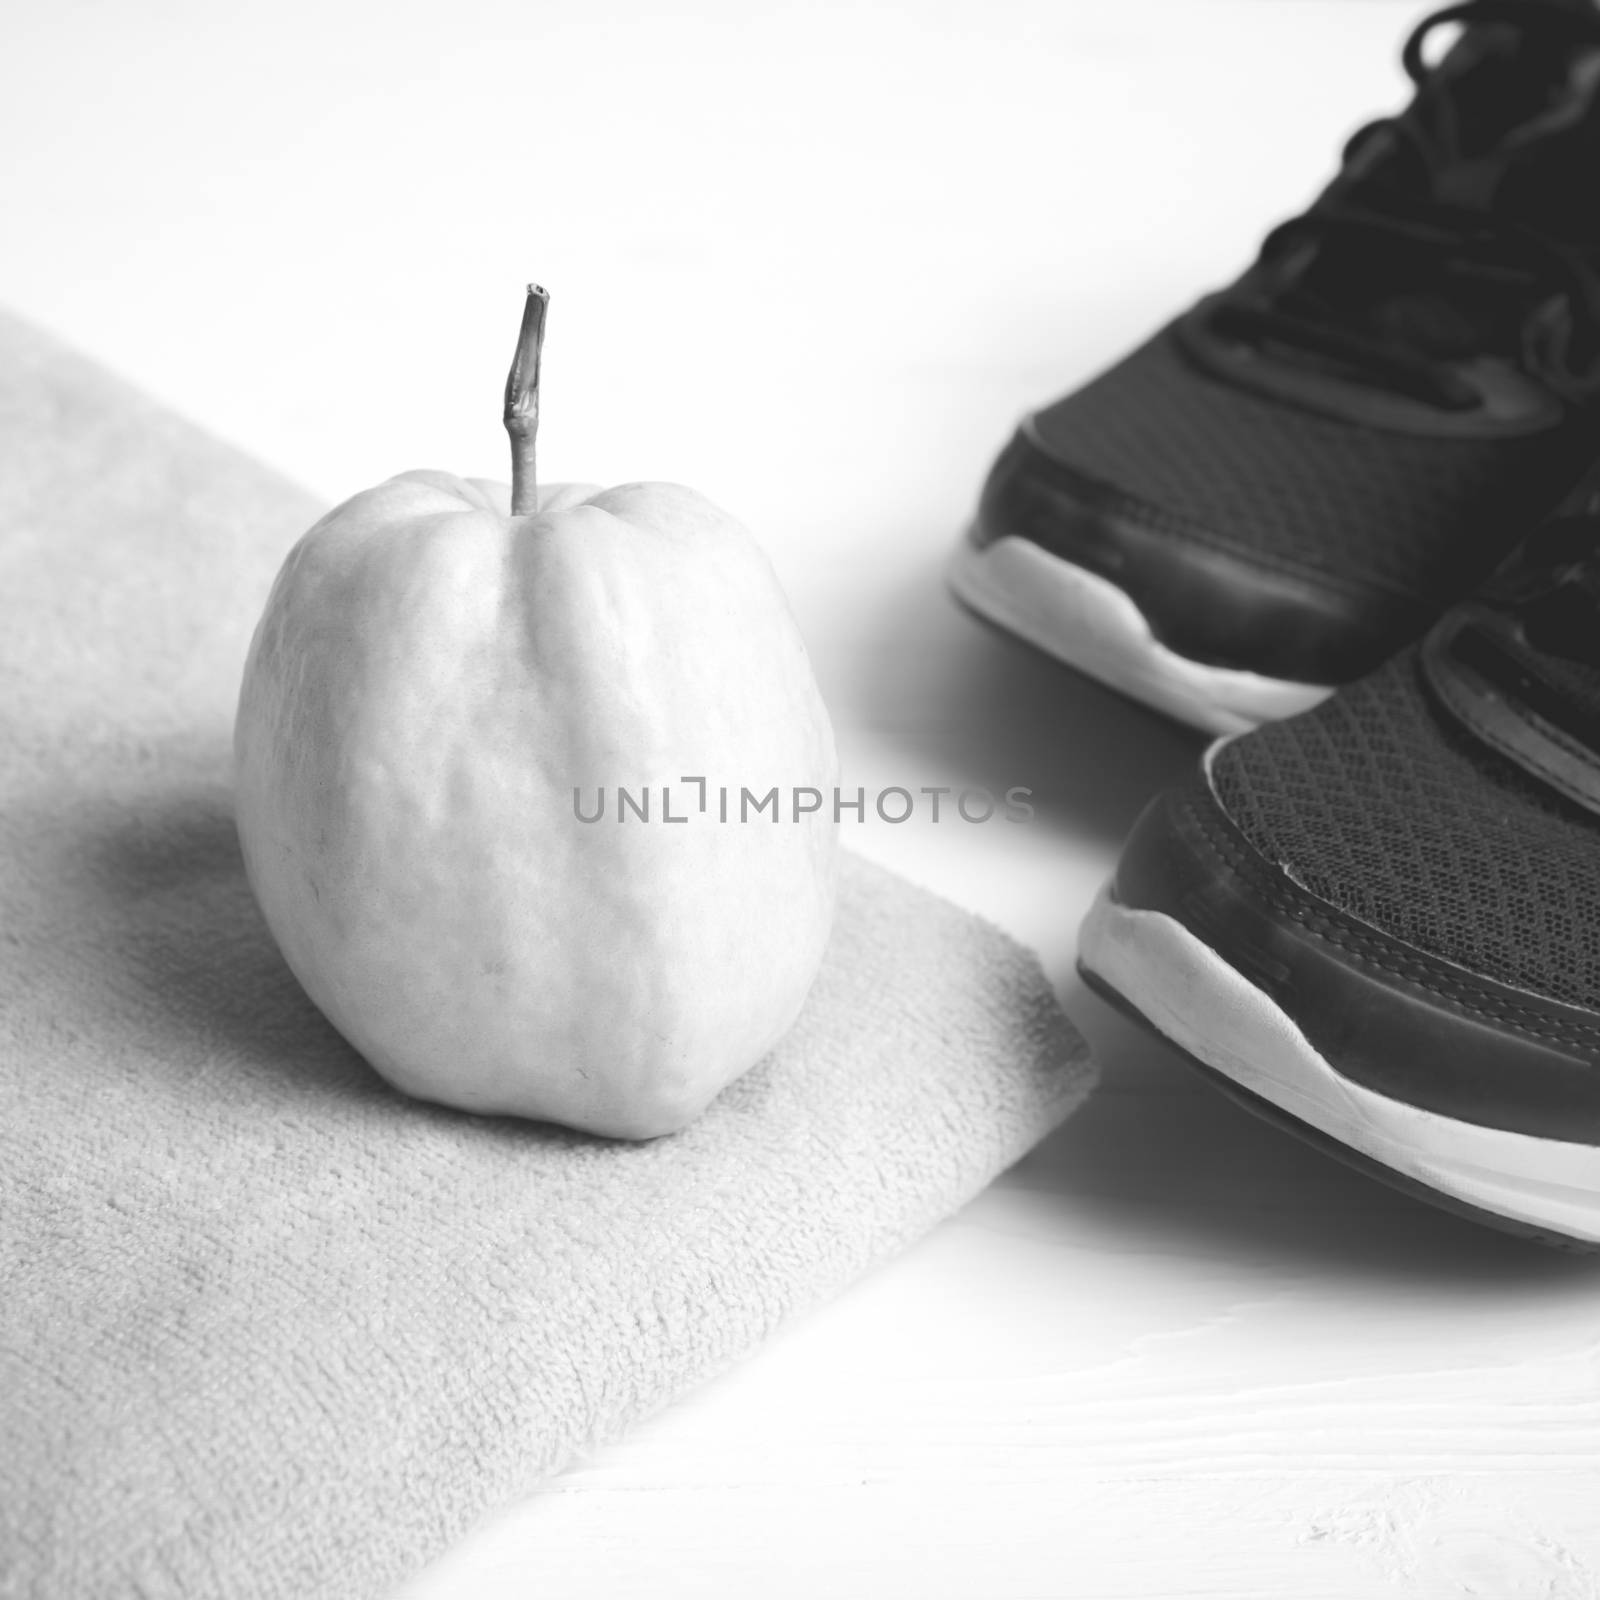 fitness equipment : running shoes,towel and guava fruit on white wood table black and white color style